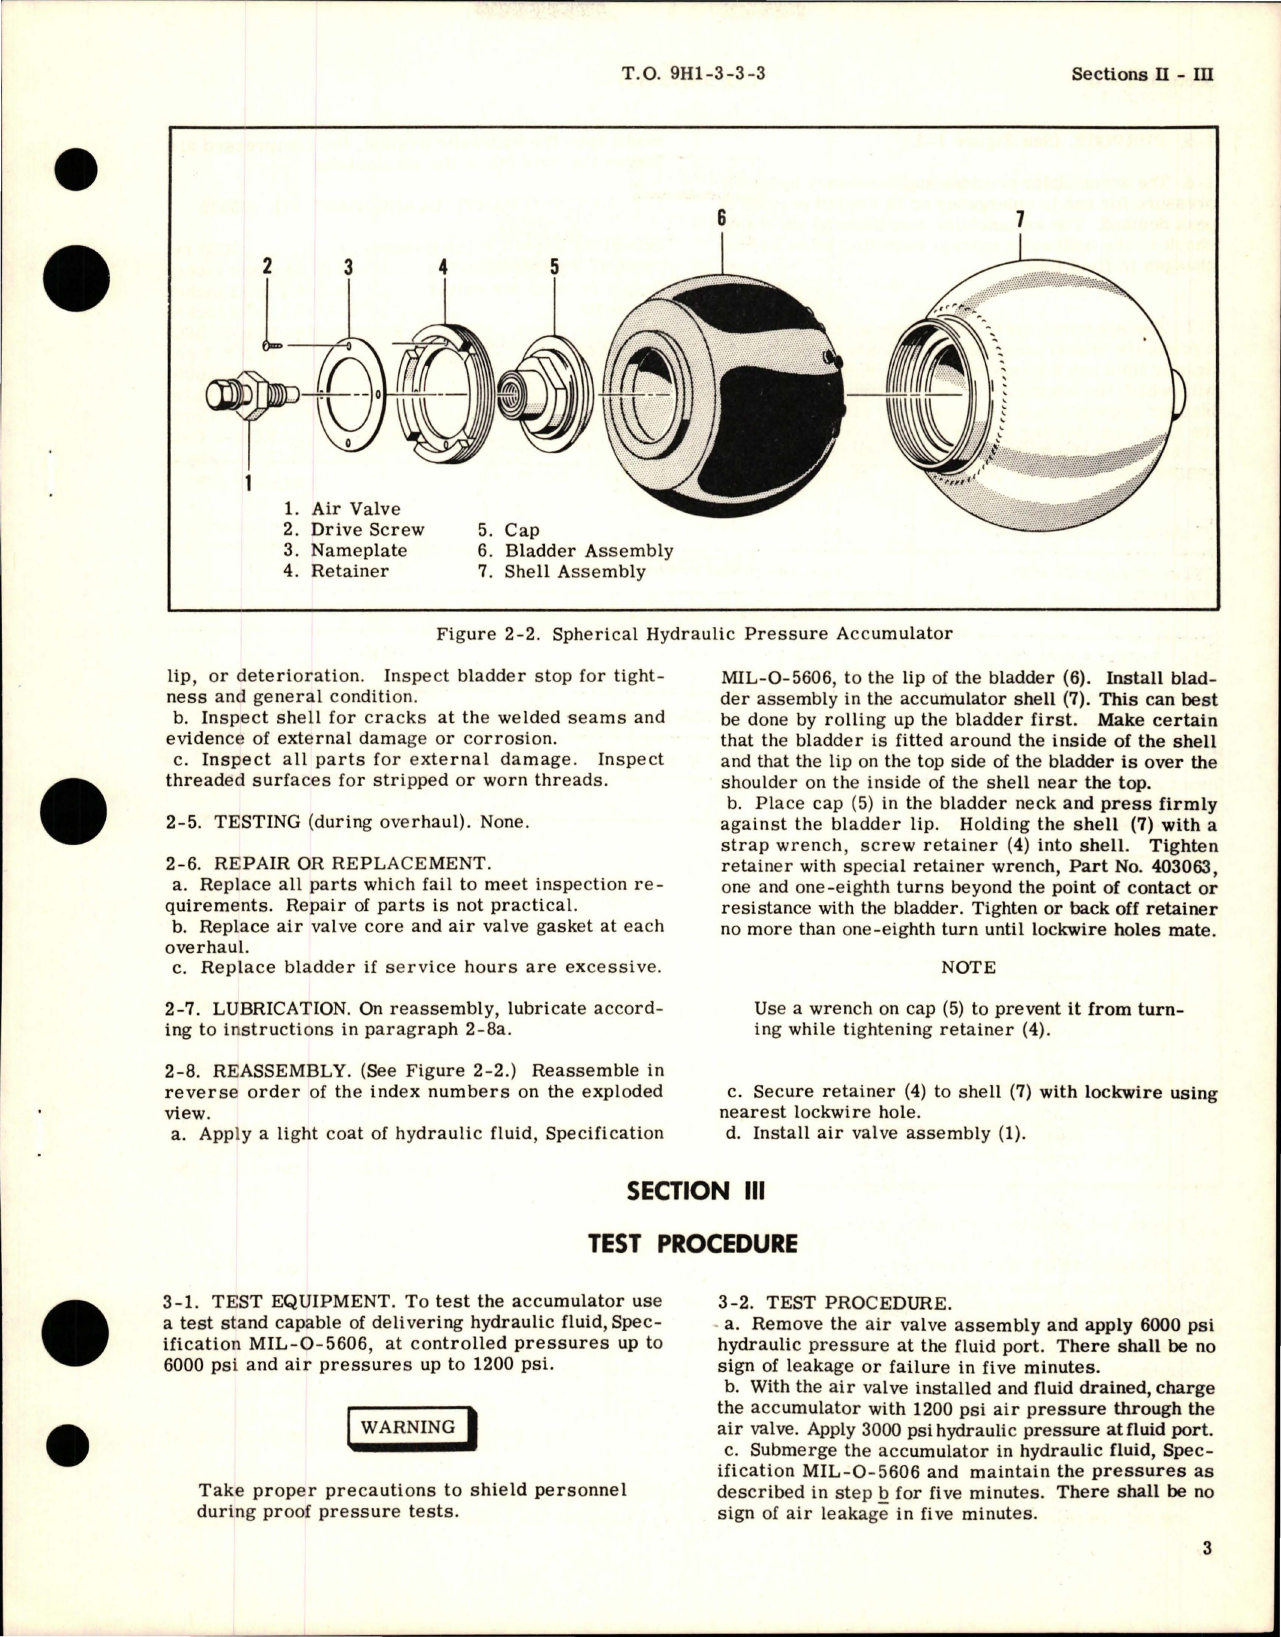 Sample page 5 from AirCorps Library document: Overhaul Instructions for Spherical Hydraulic Pressure Accumulators - 3000 PSI - Parts 405525, 405554, 406920, 406920-2, and 408410